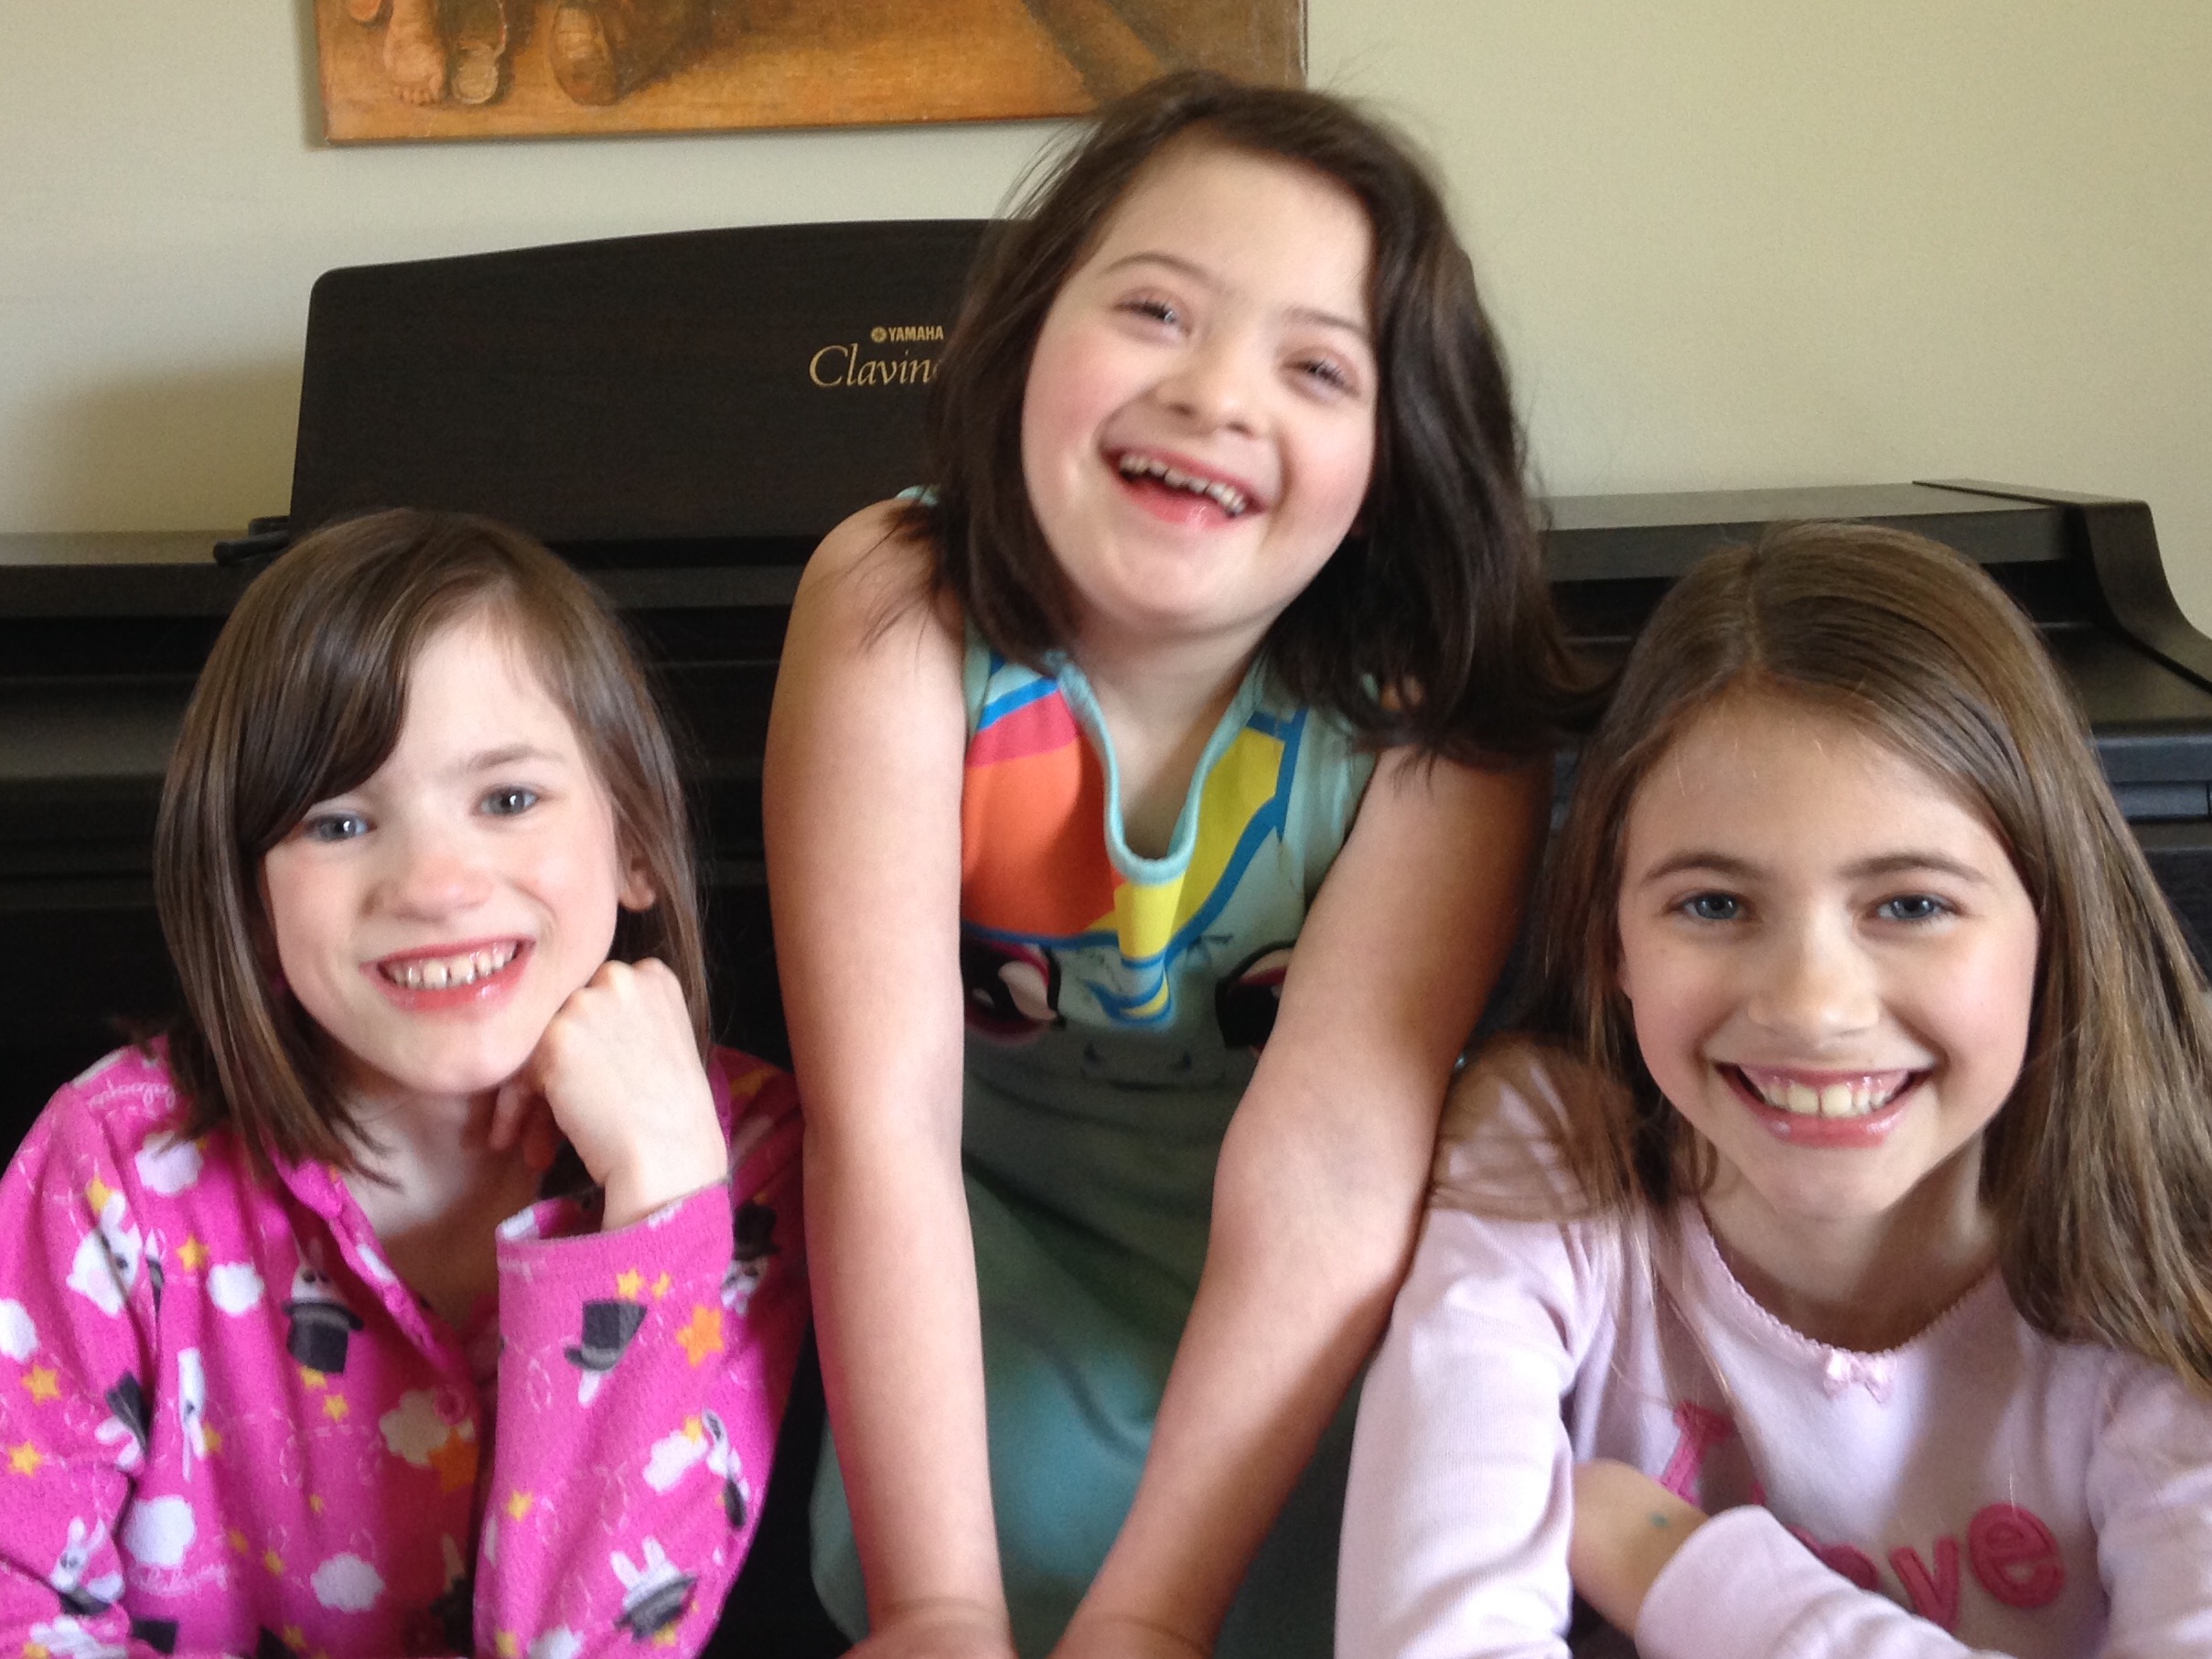 Three sisters smiling at the camera, two have disabilities, one does not